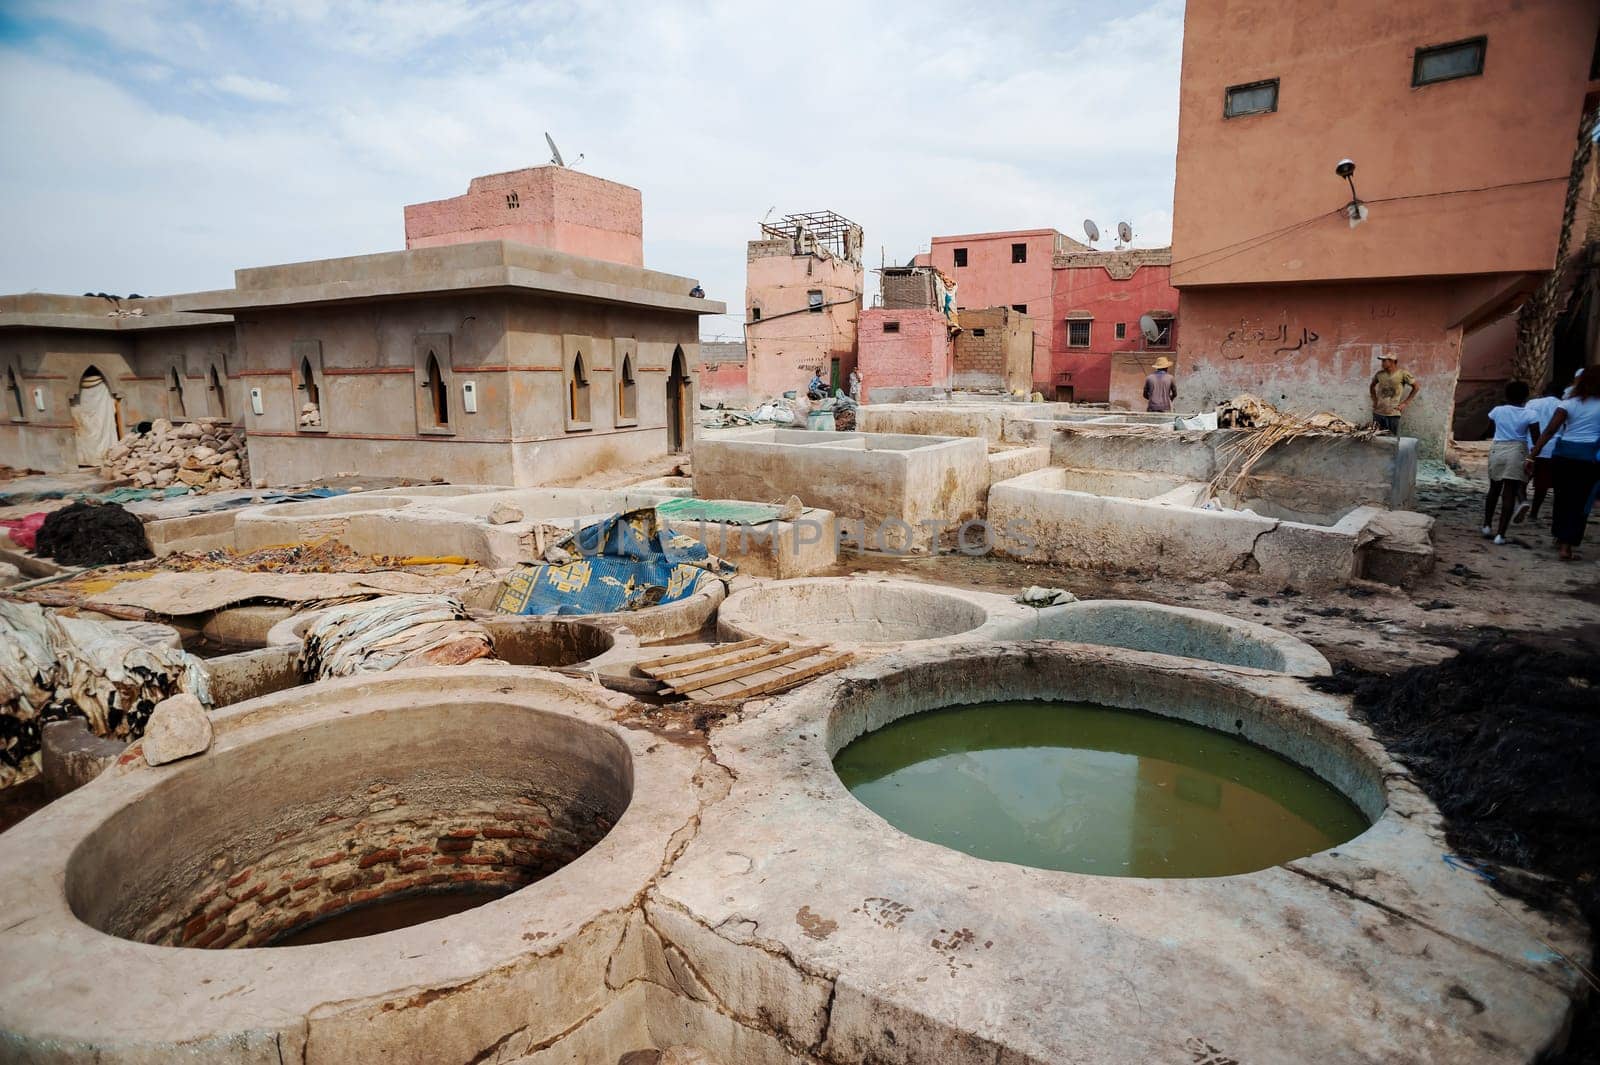 Tannery in Marrakesh, Morocco by Giamplume